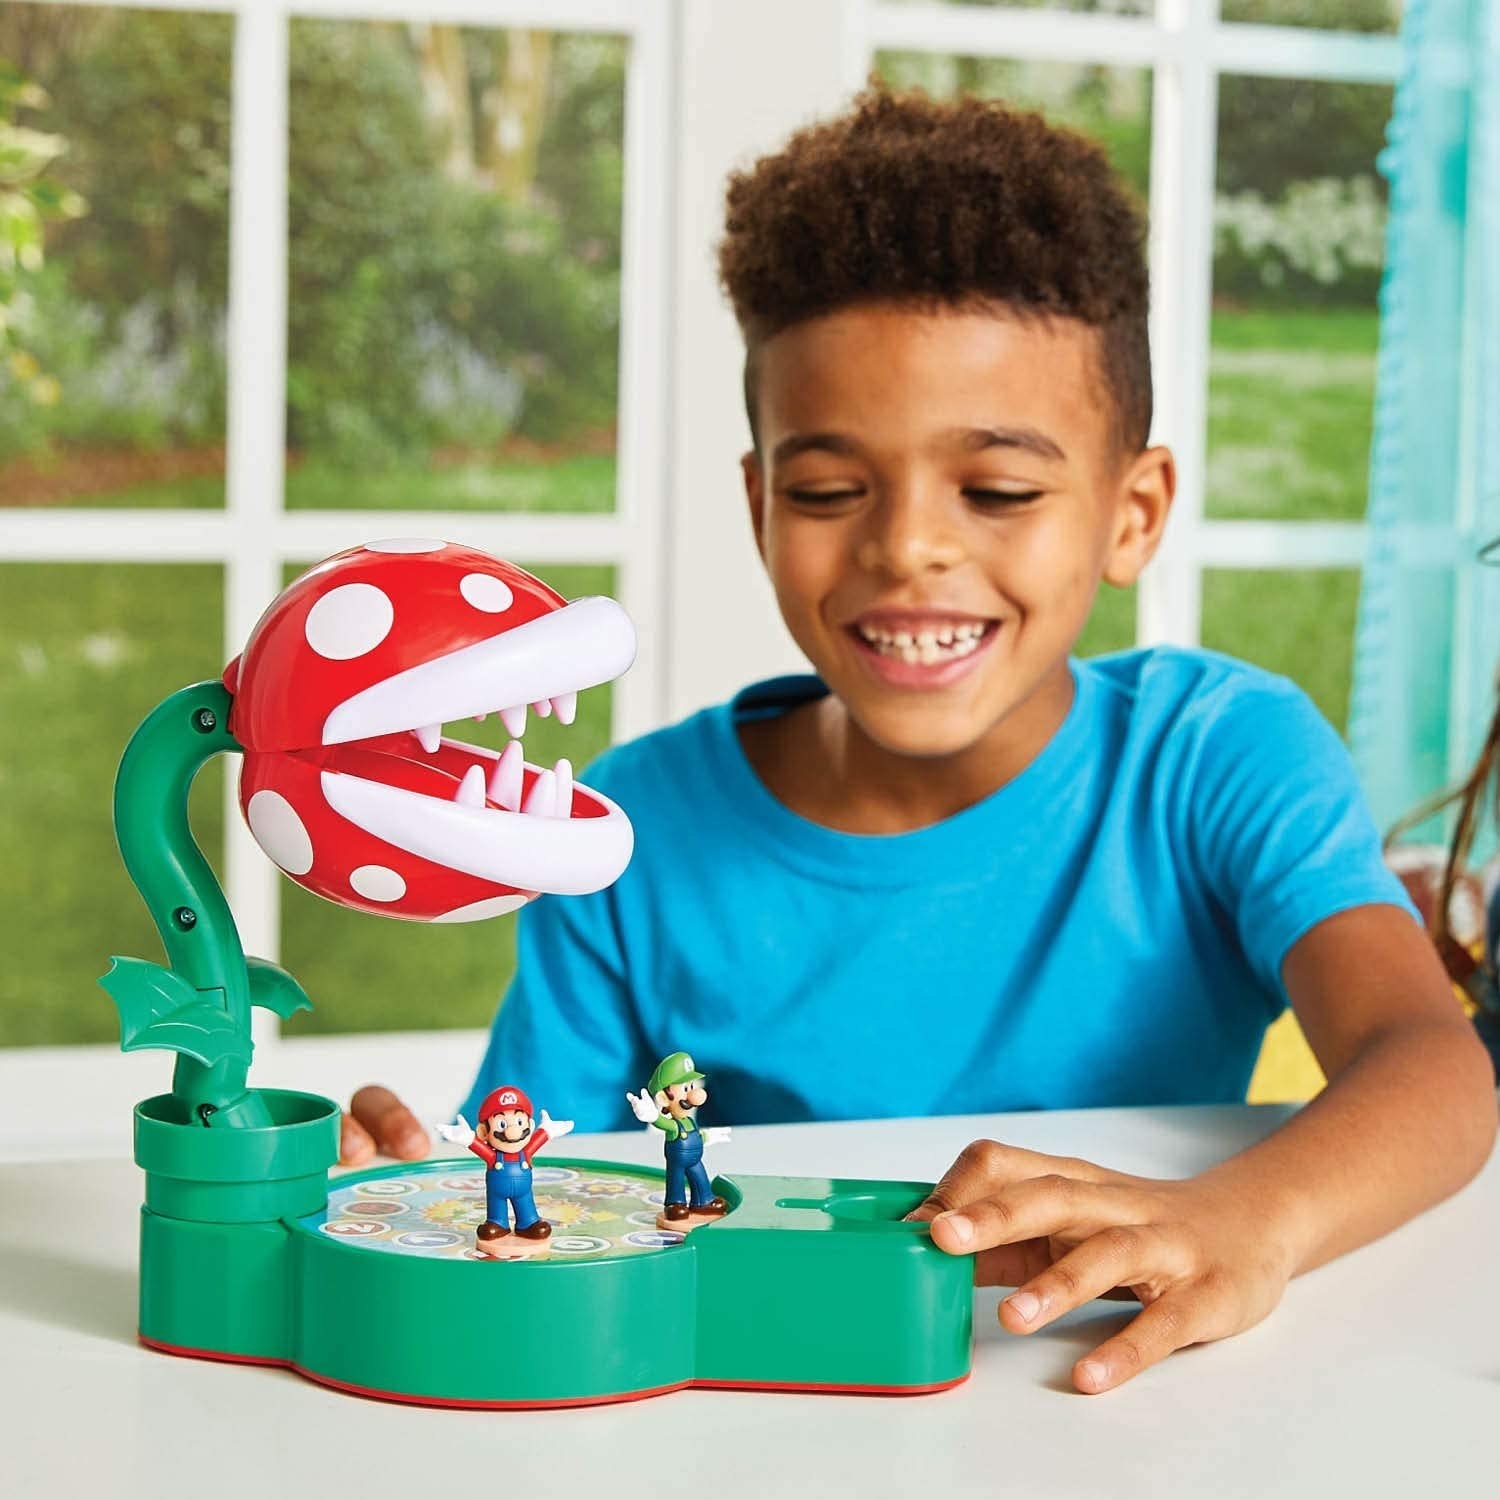 Child playing a Mario Brothers tabletop game with large piranha plant